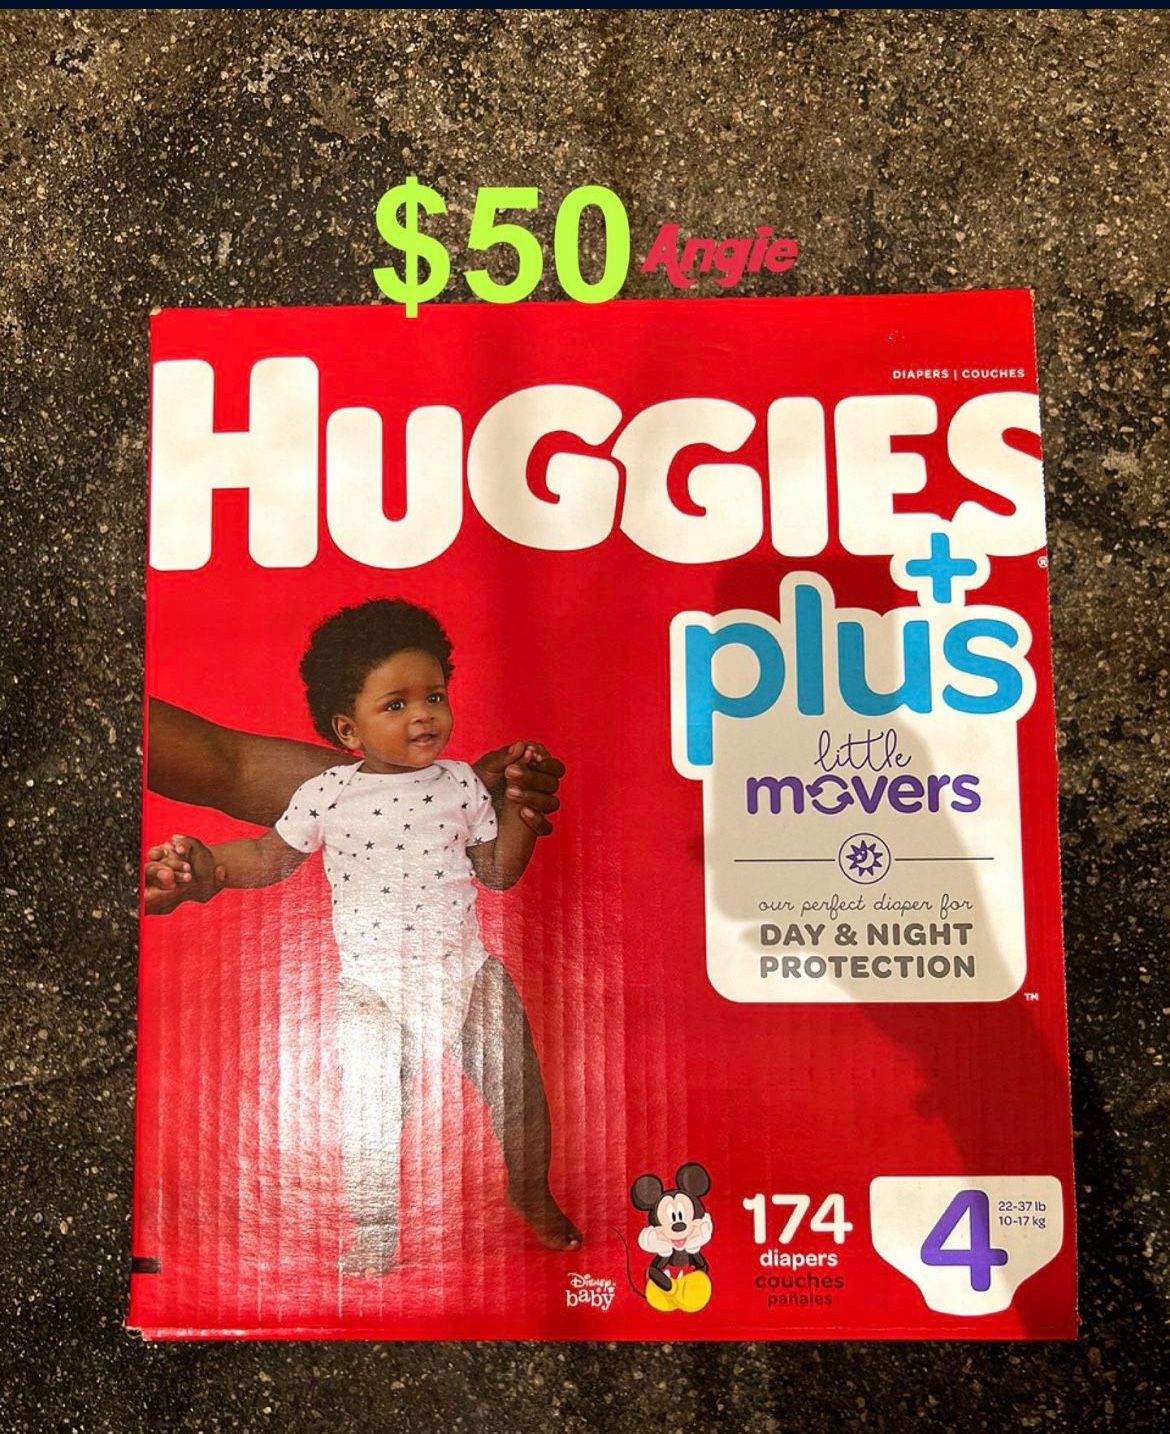 Huggies Little Movers Size 5 Plus